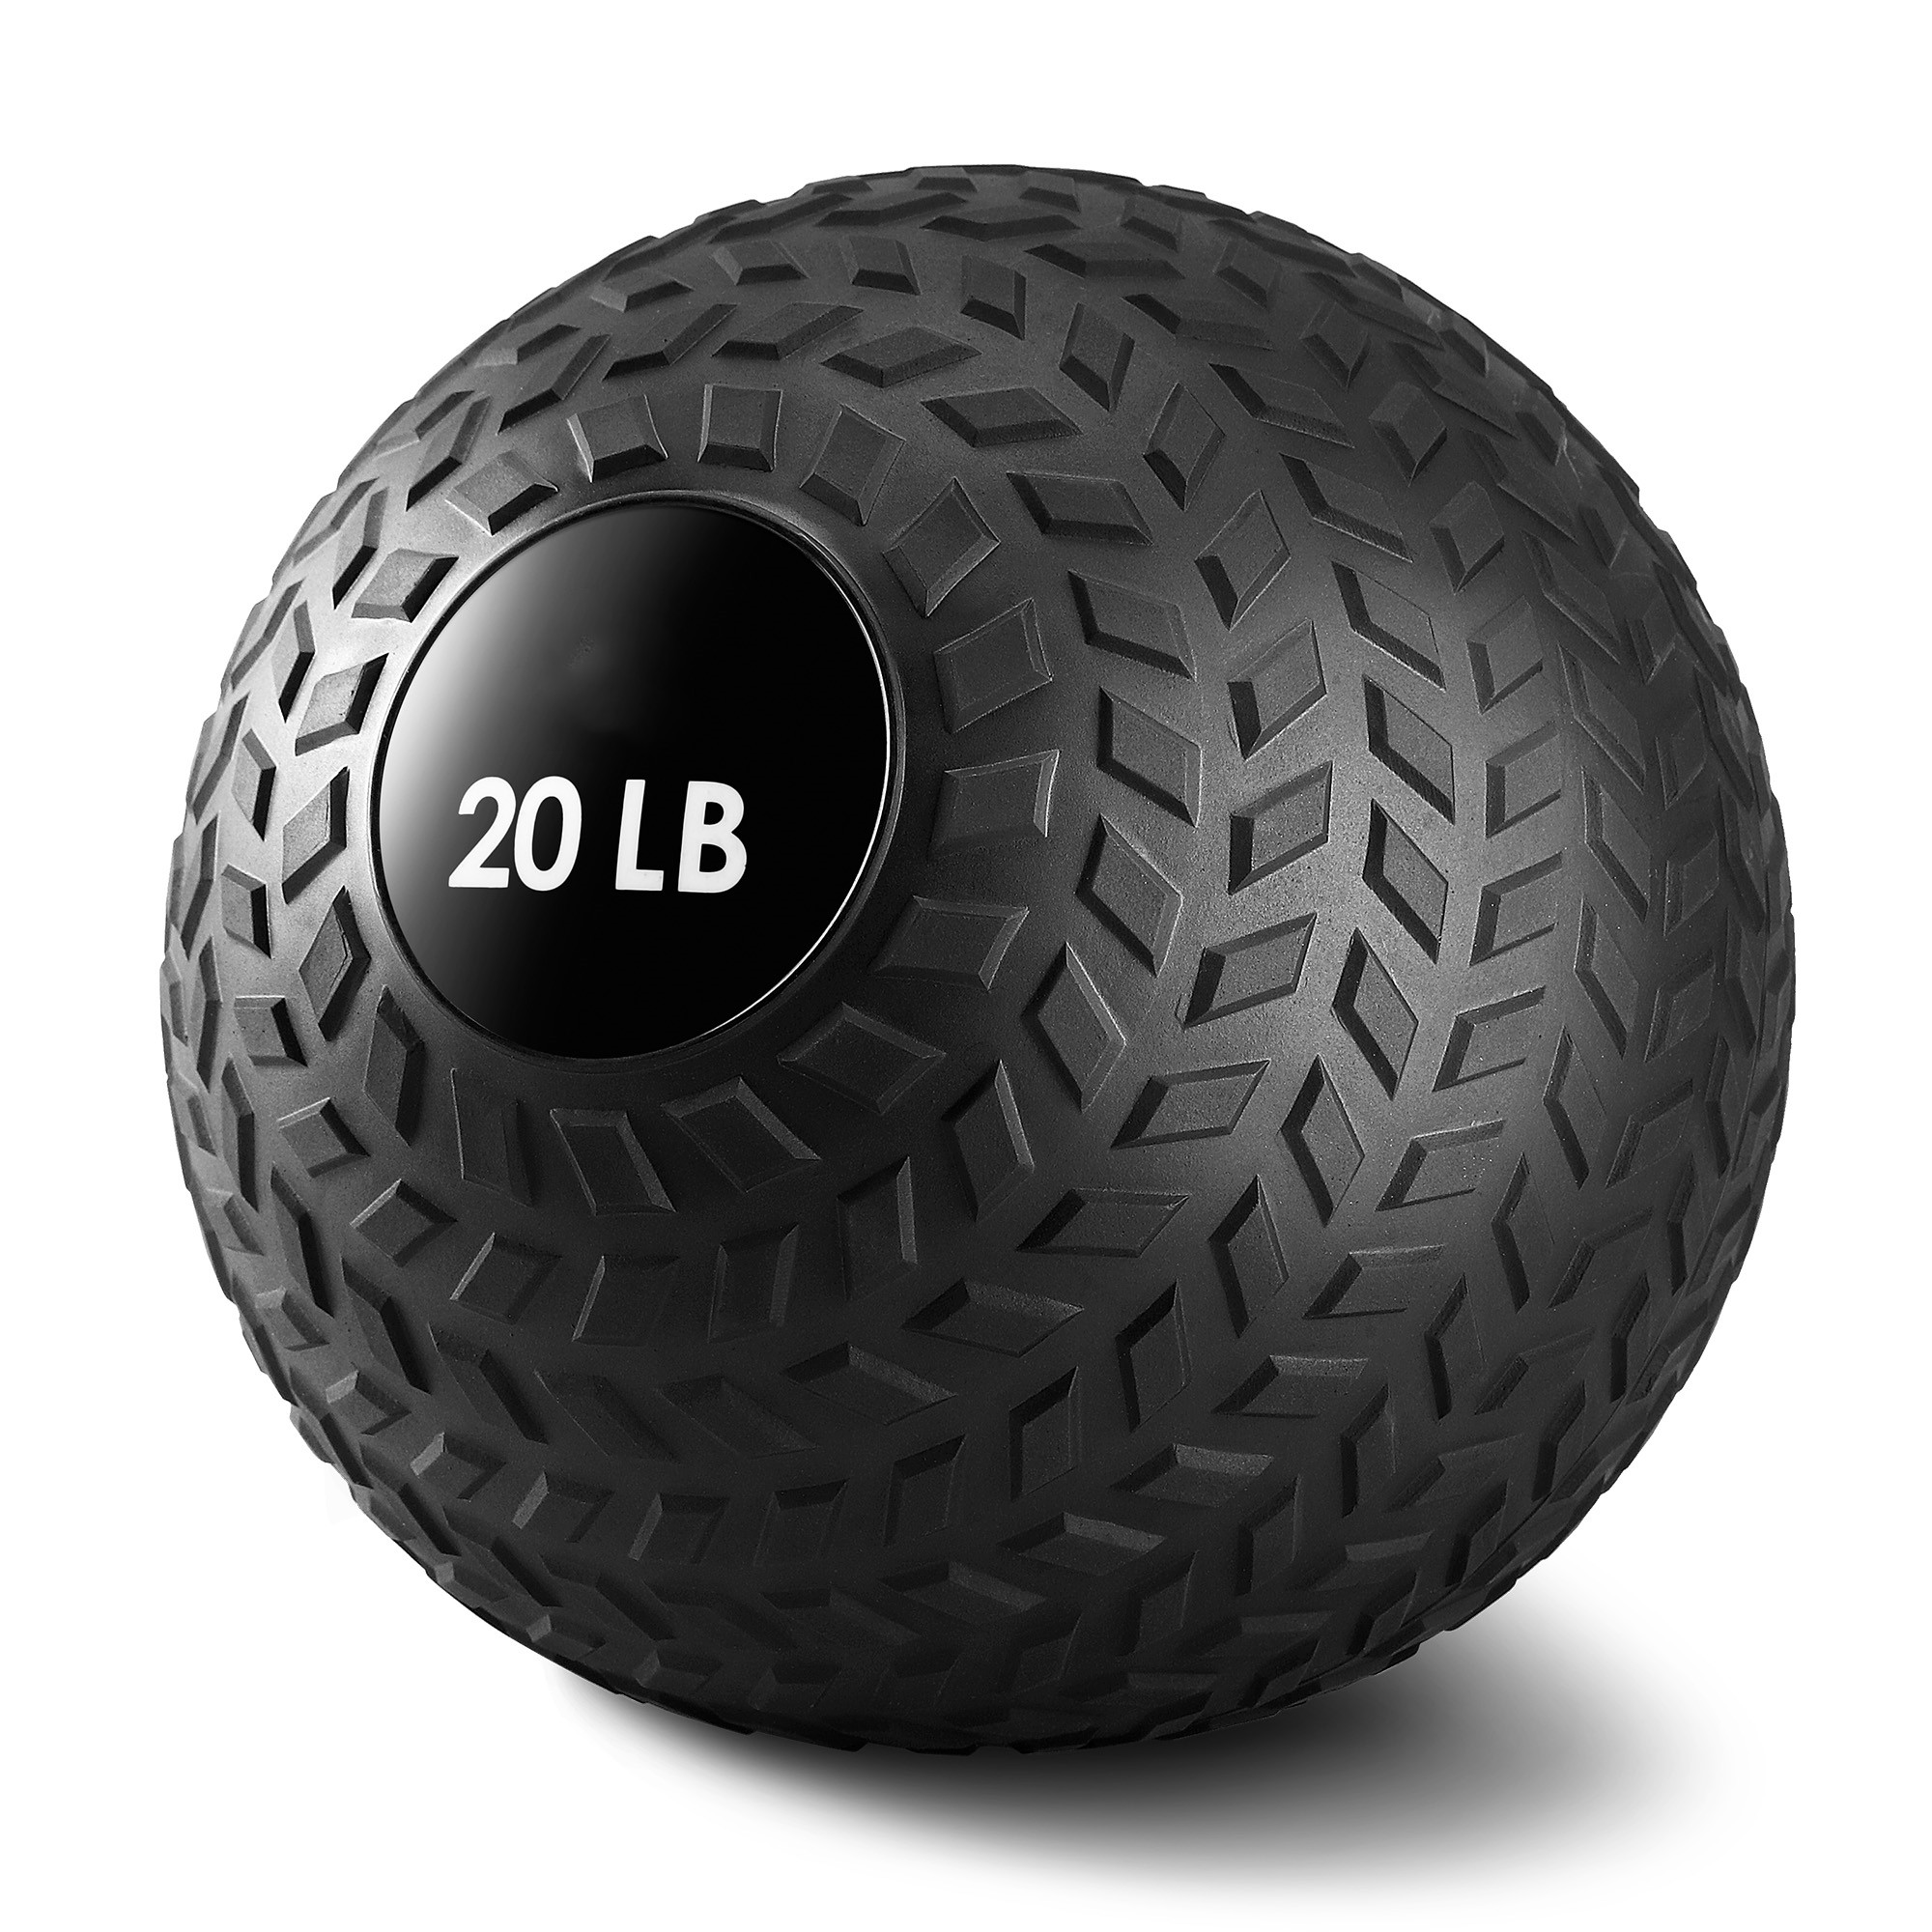 20 lb Slam Ball For Fitness Exercise Strength Conditioning CrossFit Cardio, Easy-Grip Textured Heavy Duty Rubber Shell No Bounce